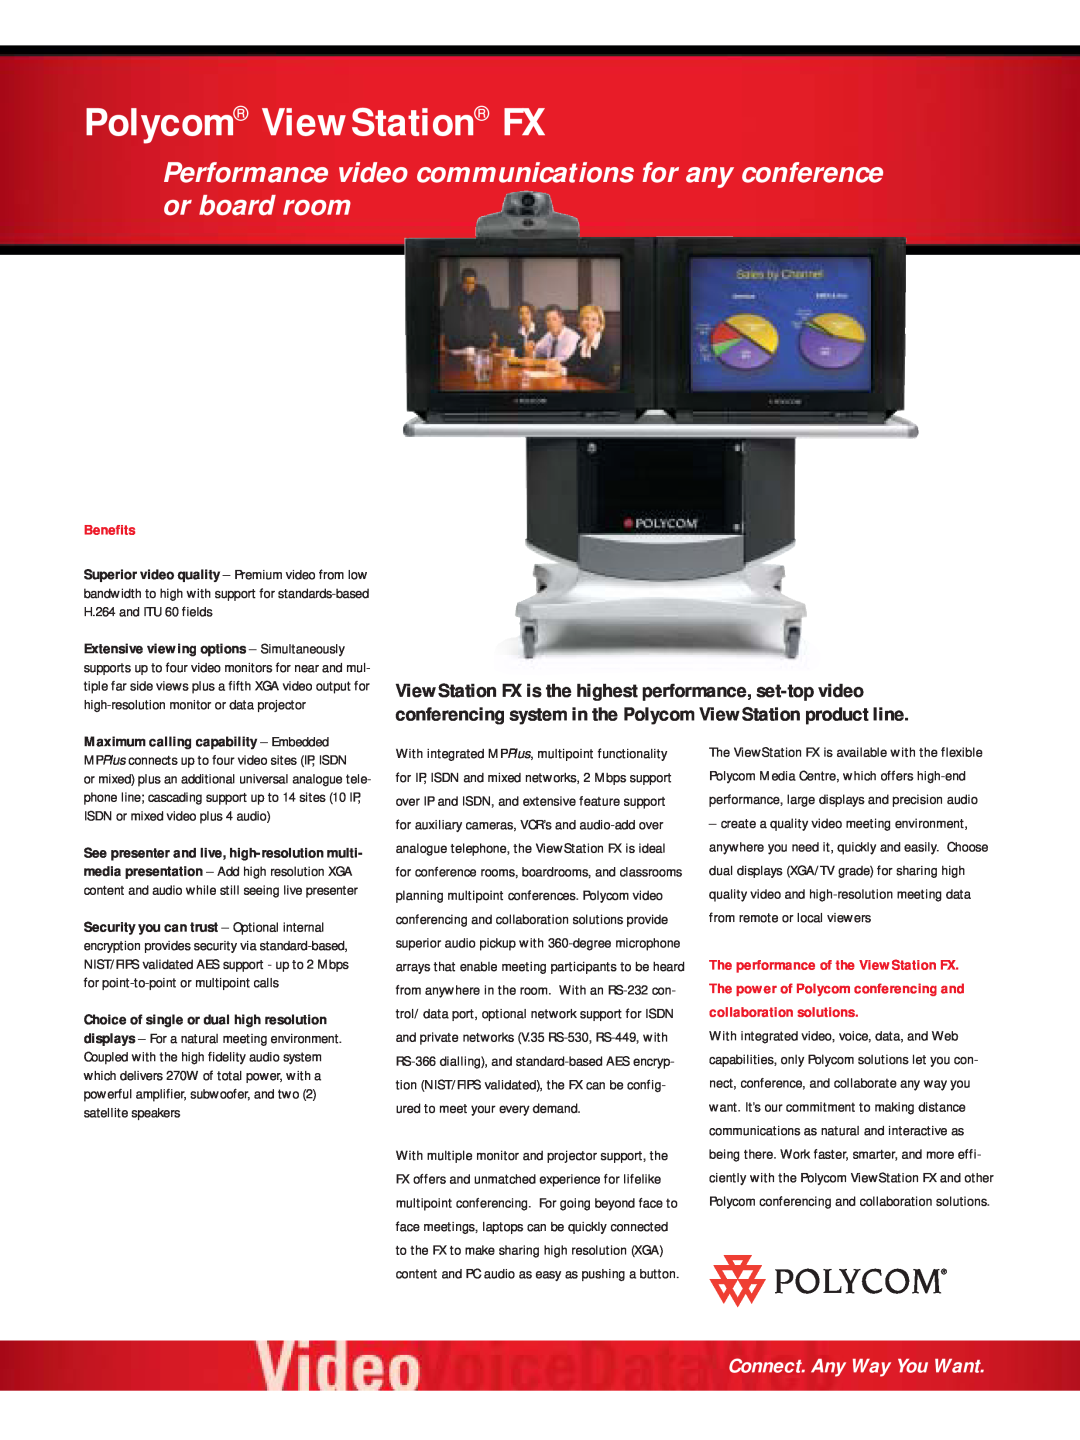 Polycom manual Polycom ViewStation FX, Performance video communications for any conference or board room, Benefits 